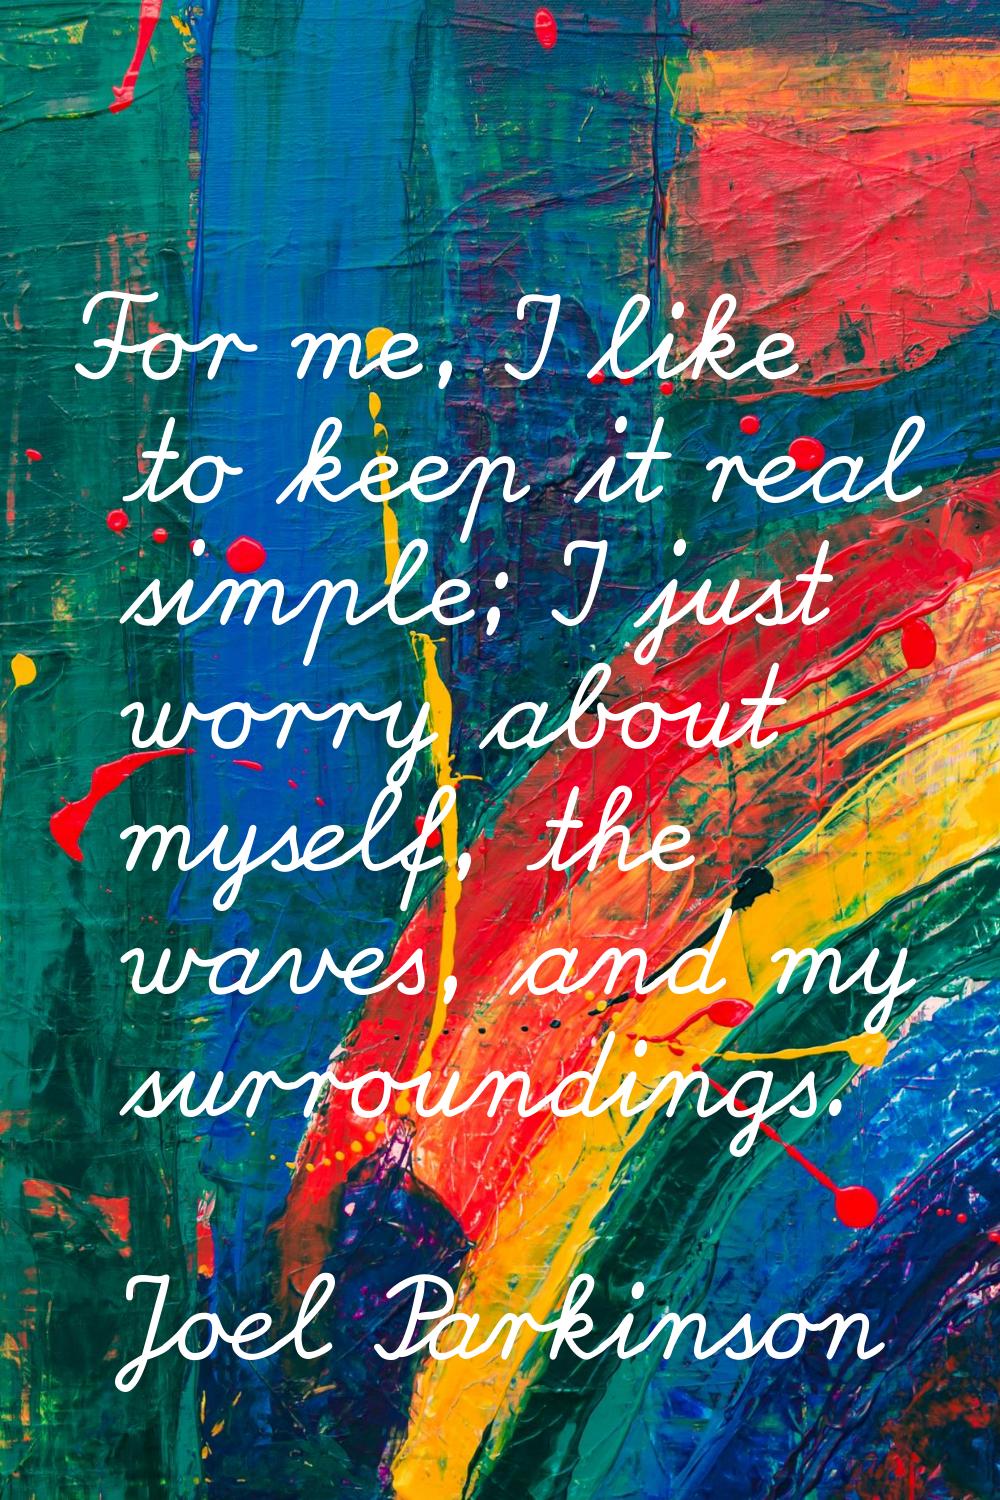 For me, I like to keep it real simple; I just worry about myself, the waves, and my surroundings.